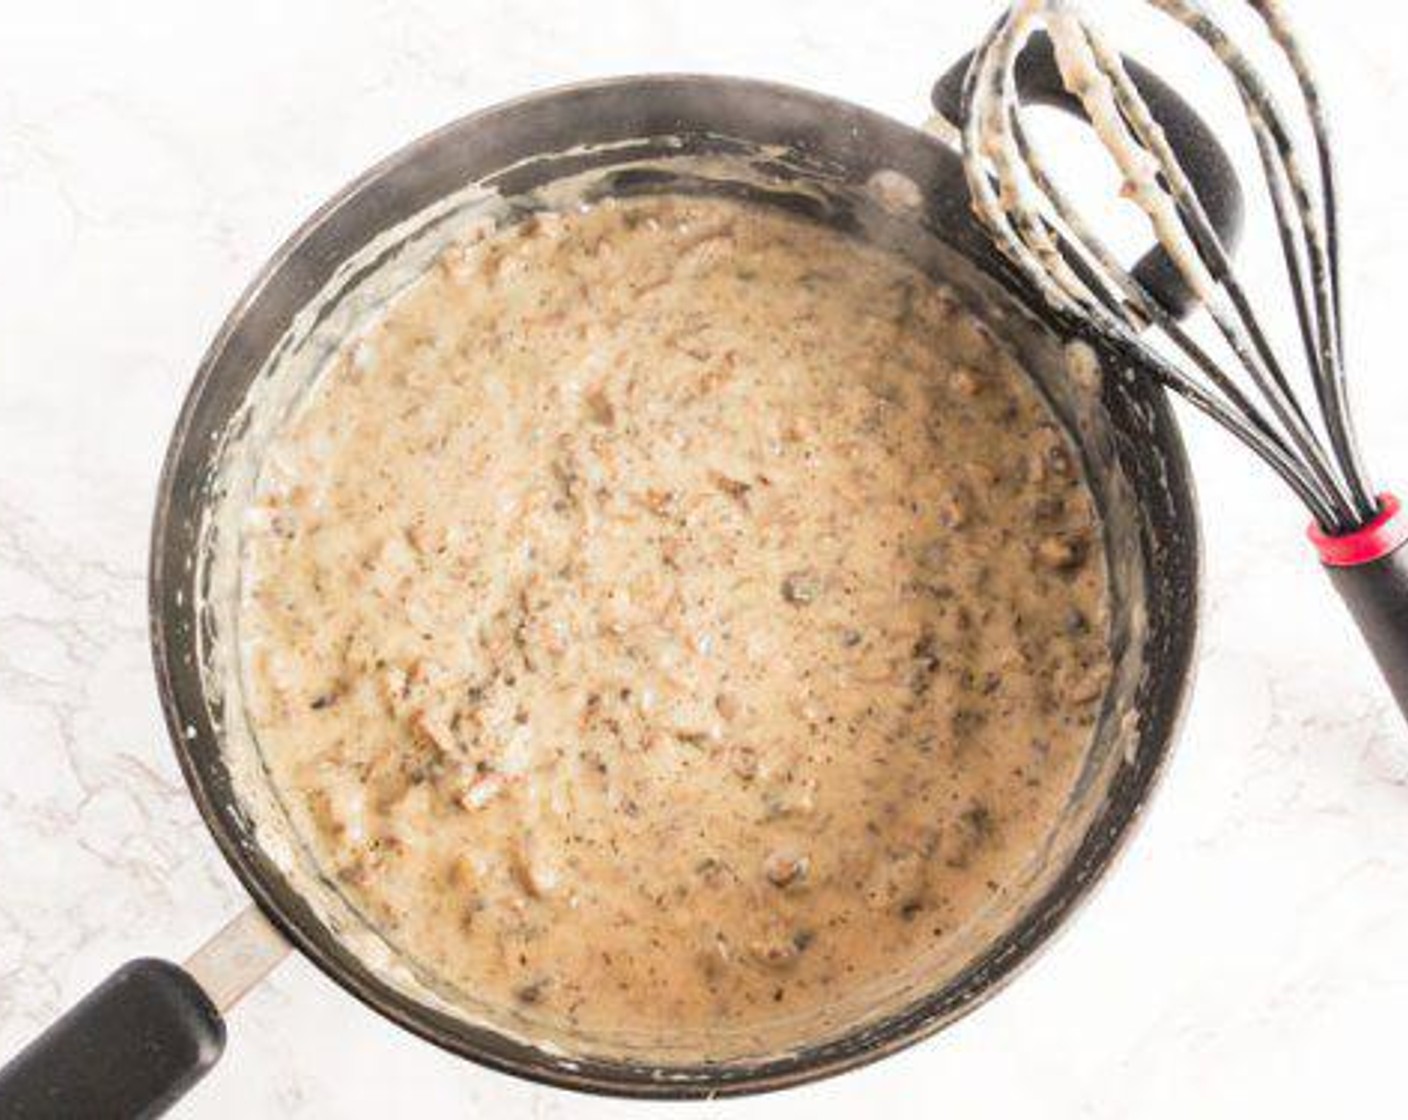 step 2 In a large pan or extra large 12-inch oven-safe skillet, whisk Almond Milk (3 cups), All-Purpose Flour (1/2 cup), and Buttery Spread (1/4 cup) on medium-high until smooth.